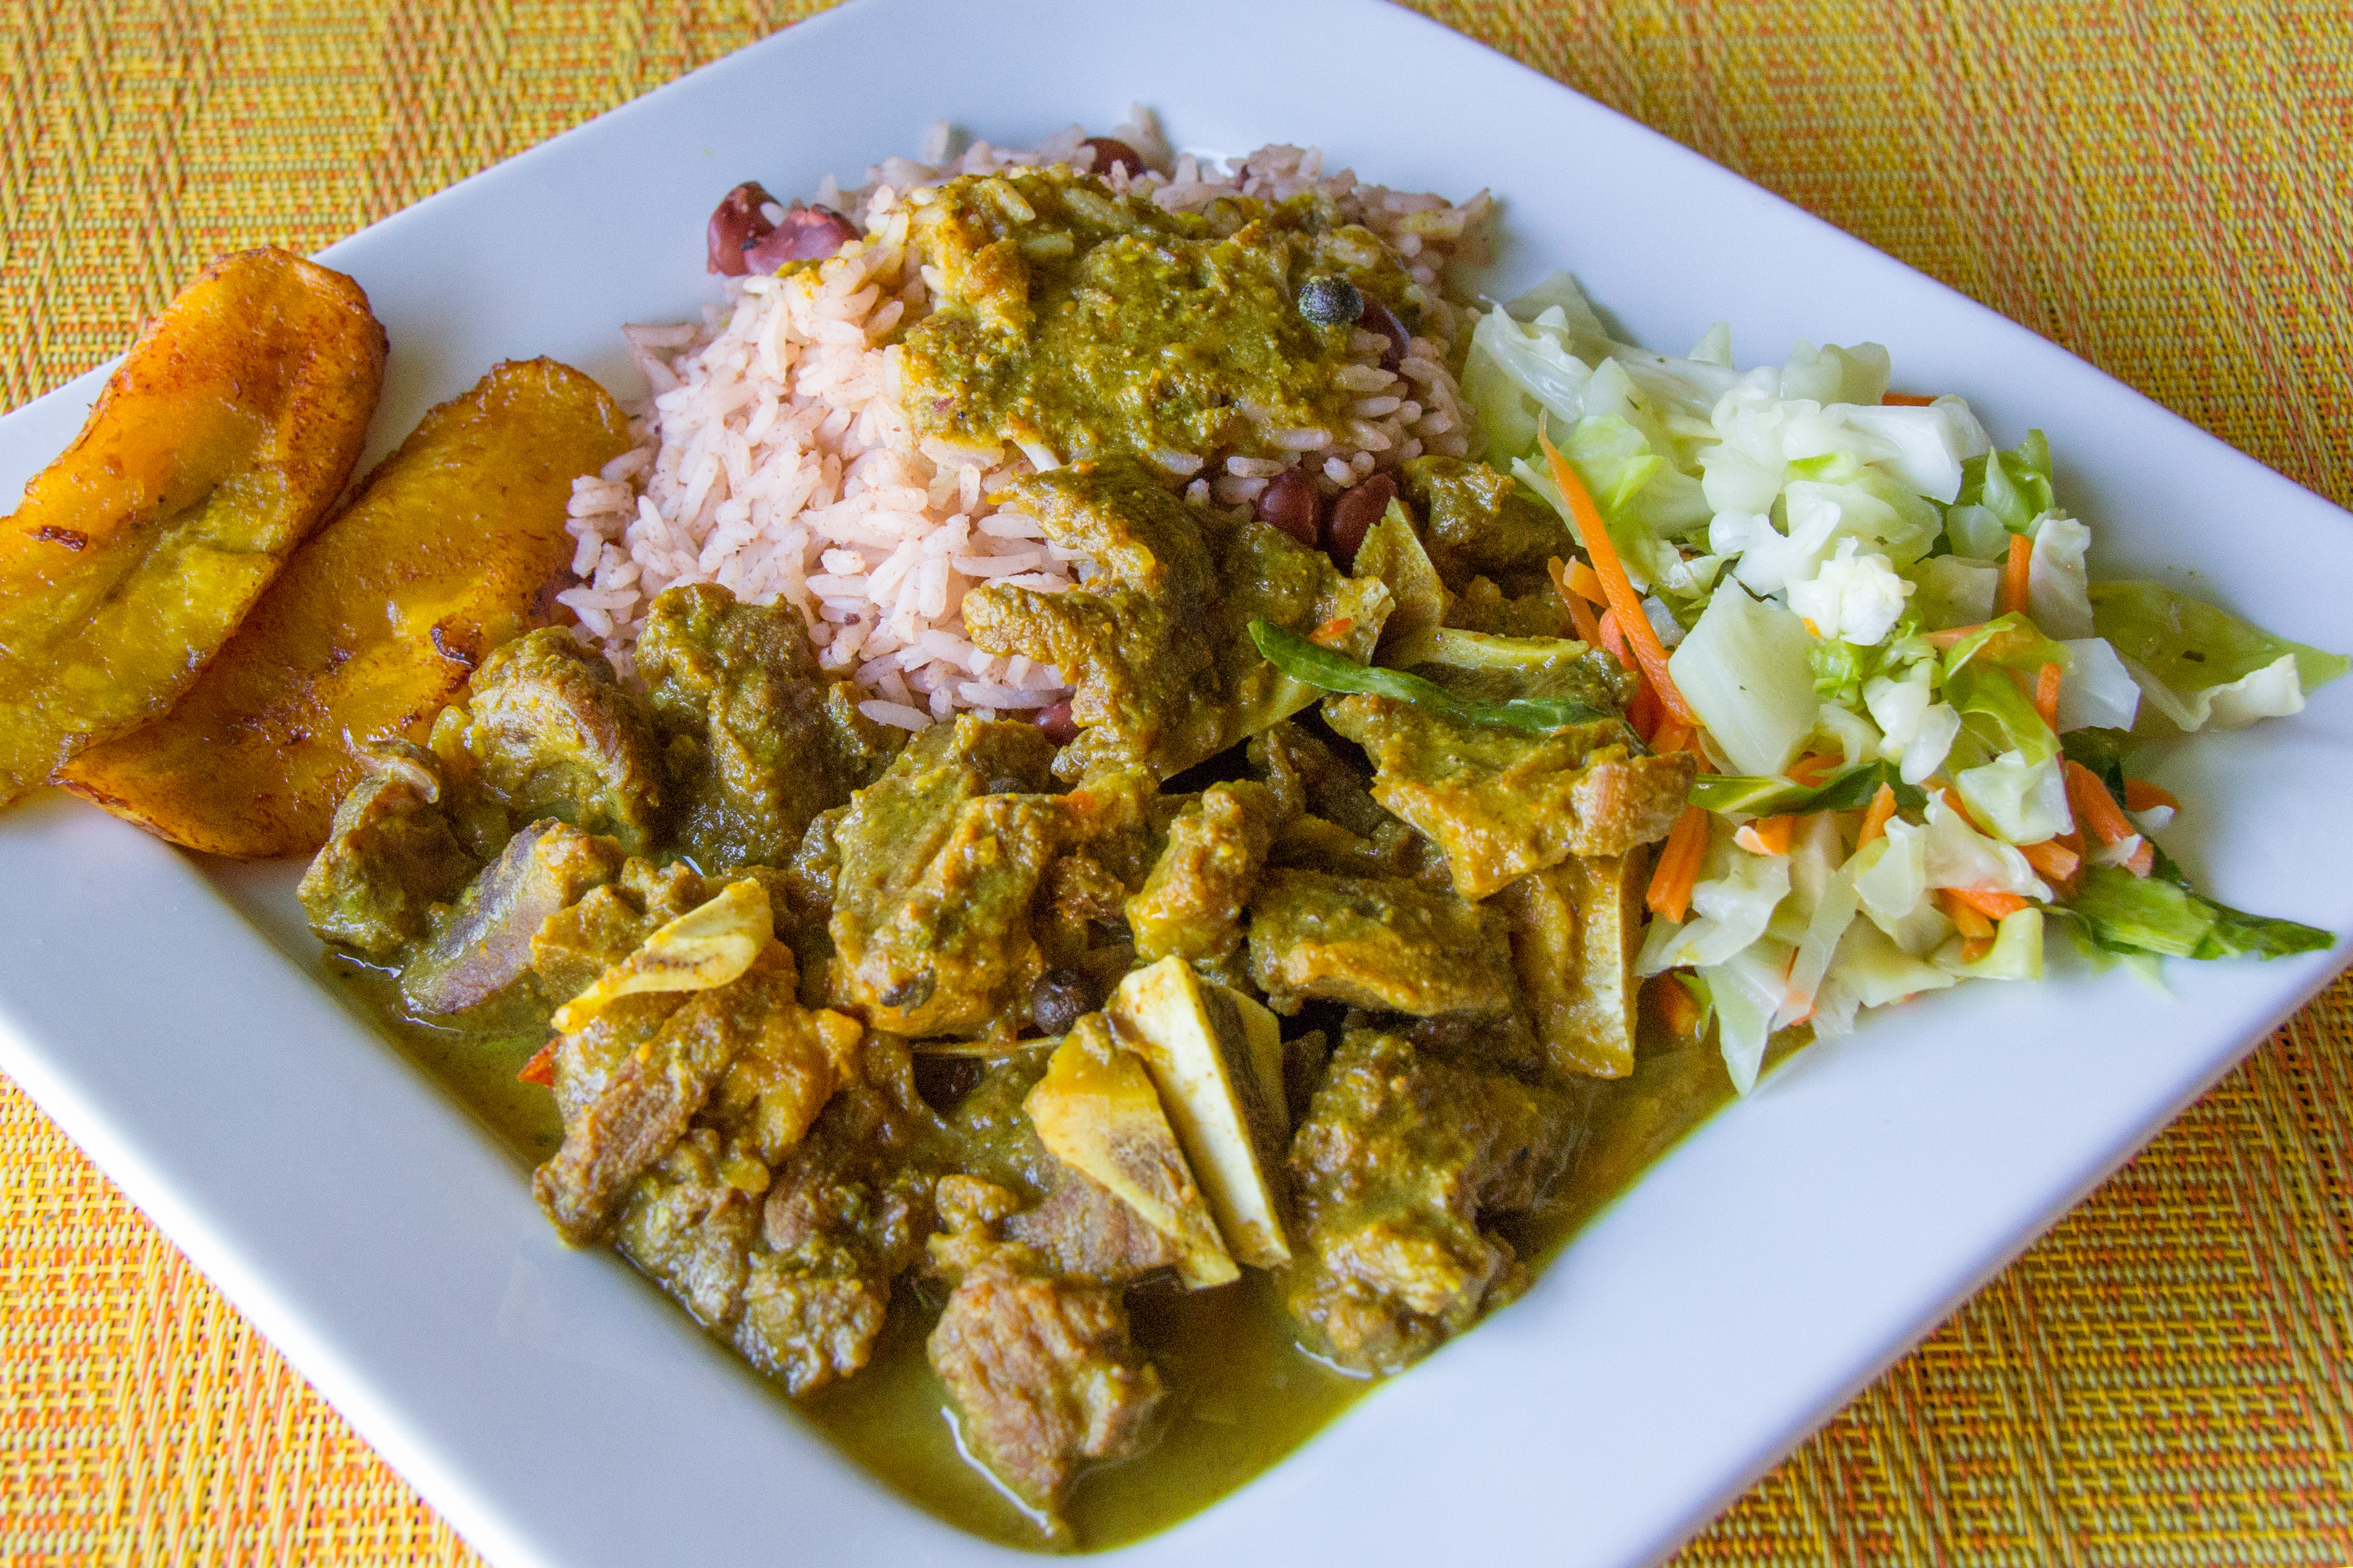 Curry Goat at CeeDee Jamaican Kitchen in Tucson